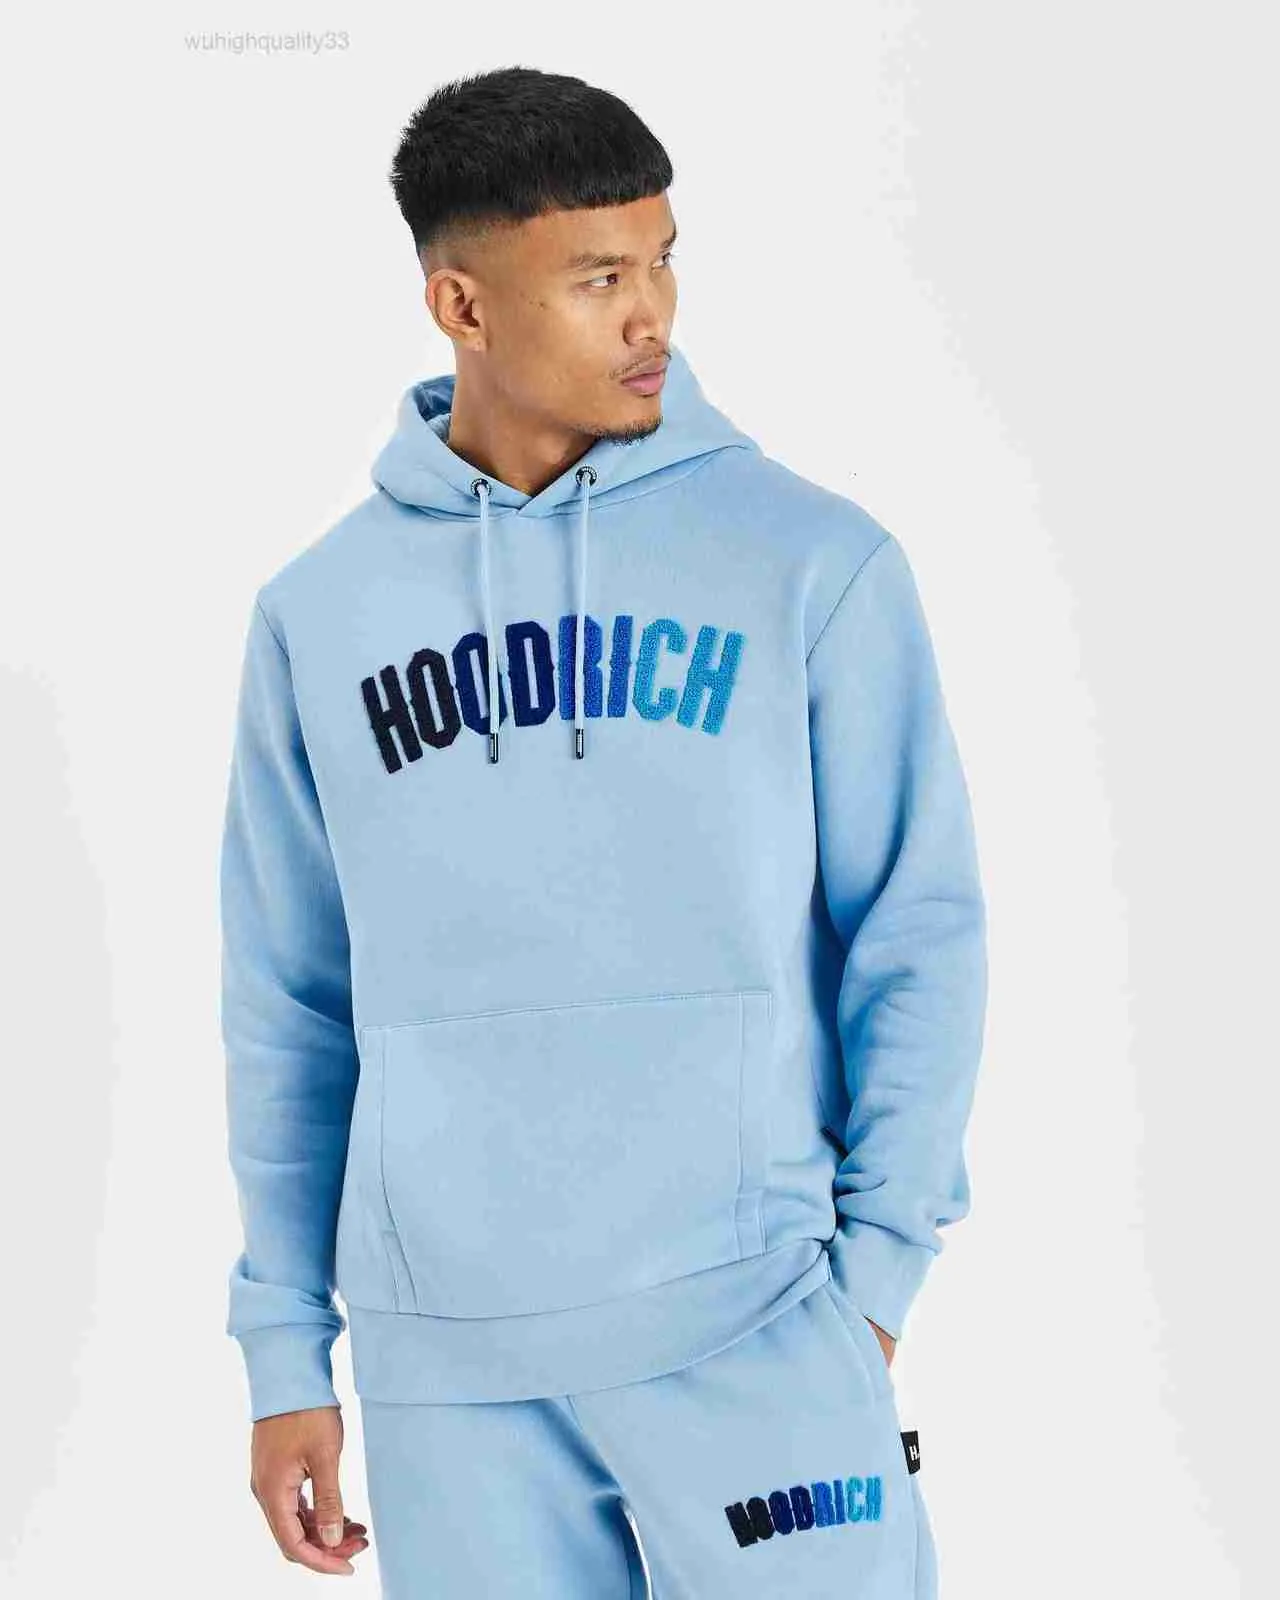 Designer Clothing Mens Hoodies Sweatshirts 2023 Winter Sports Hoodie For  Men Hoodrich Tracksuit Letter Towel Embroidered Sweatshirt Colorful Blue  Solid Swea L7 From Hcwww88, $21.02